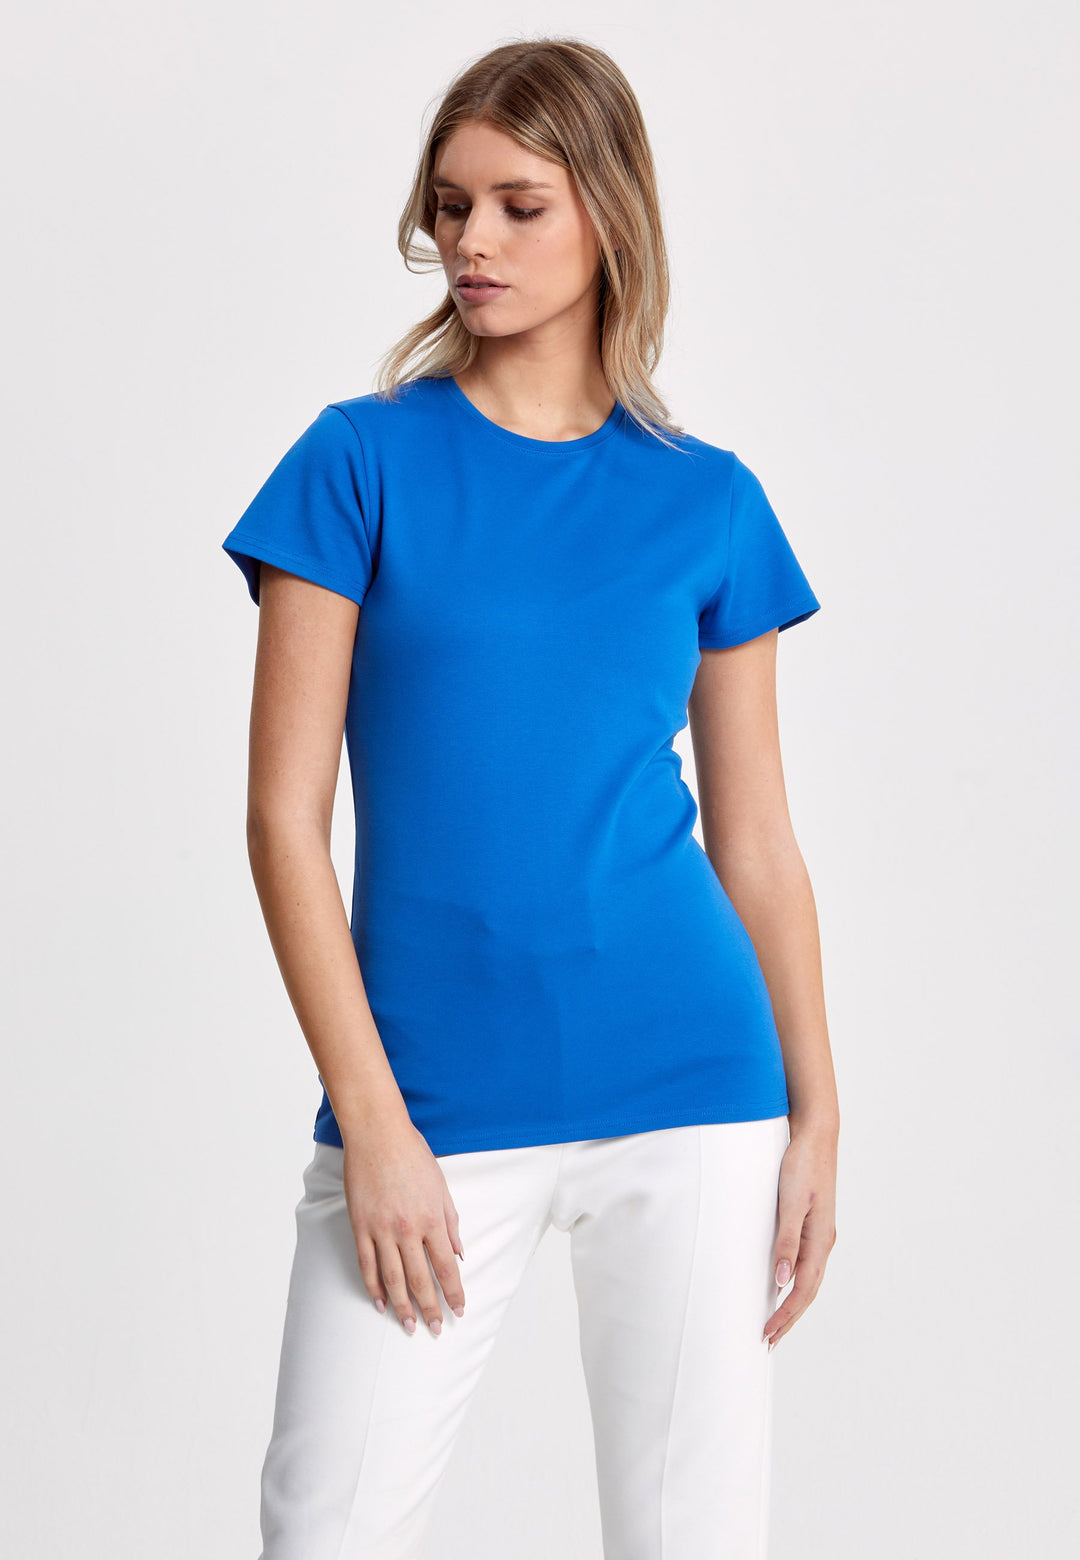 Our best-selling take on a classic T-shirt. Luxe stretch jersey and a neat round neck make this one of our most revered essentials. Cut here from a striking Cobalt blue.